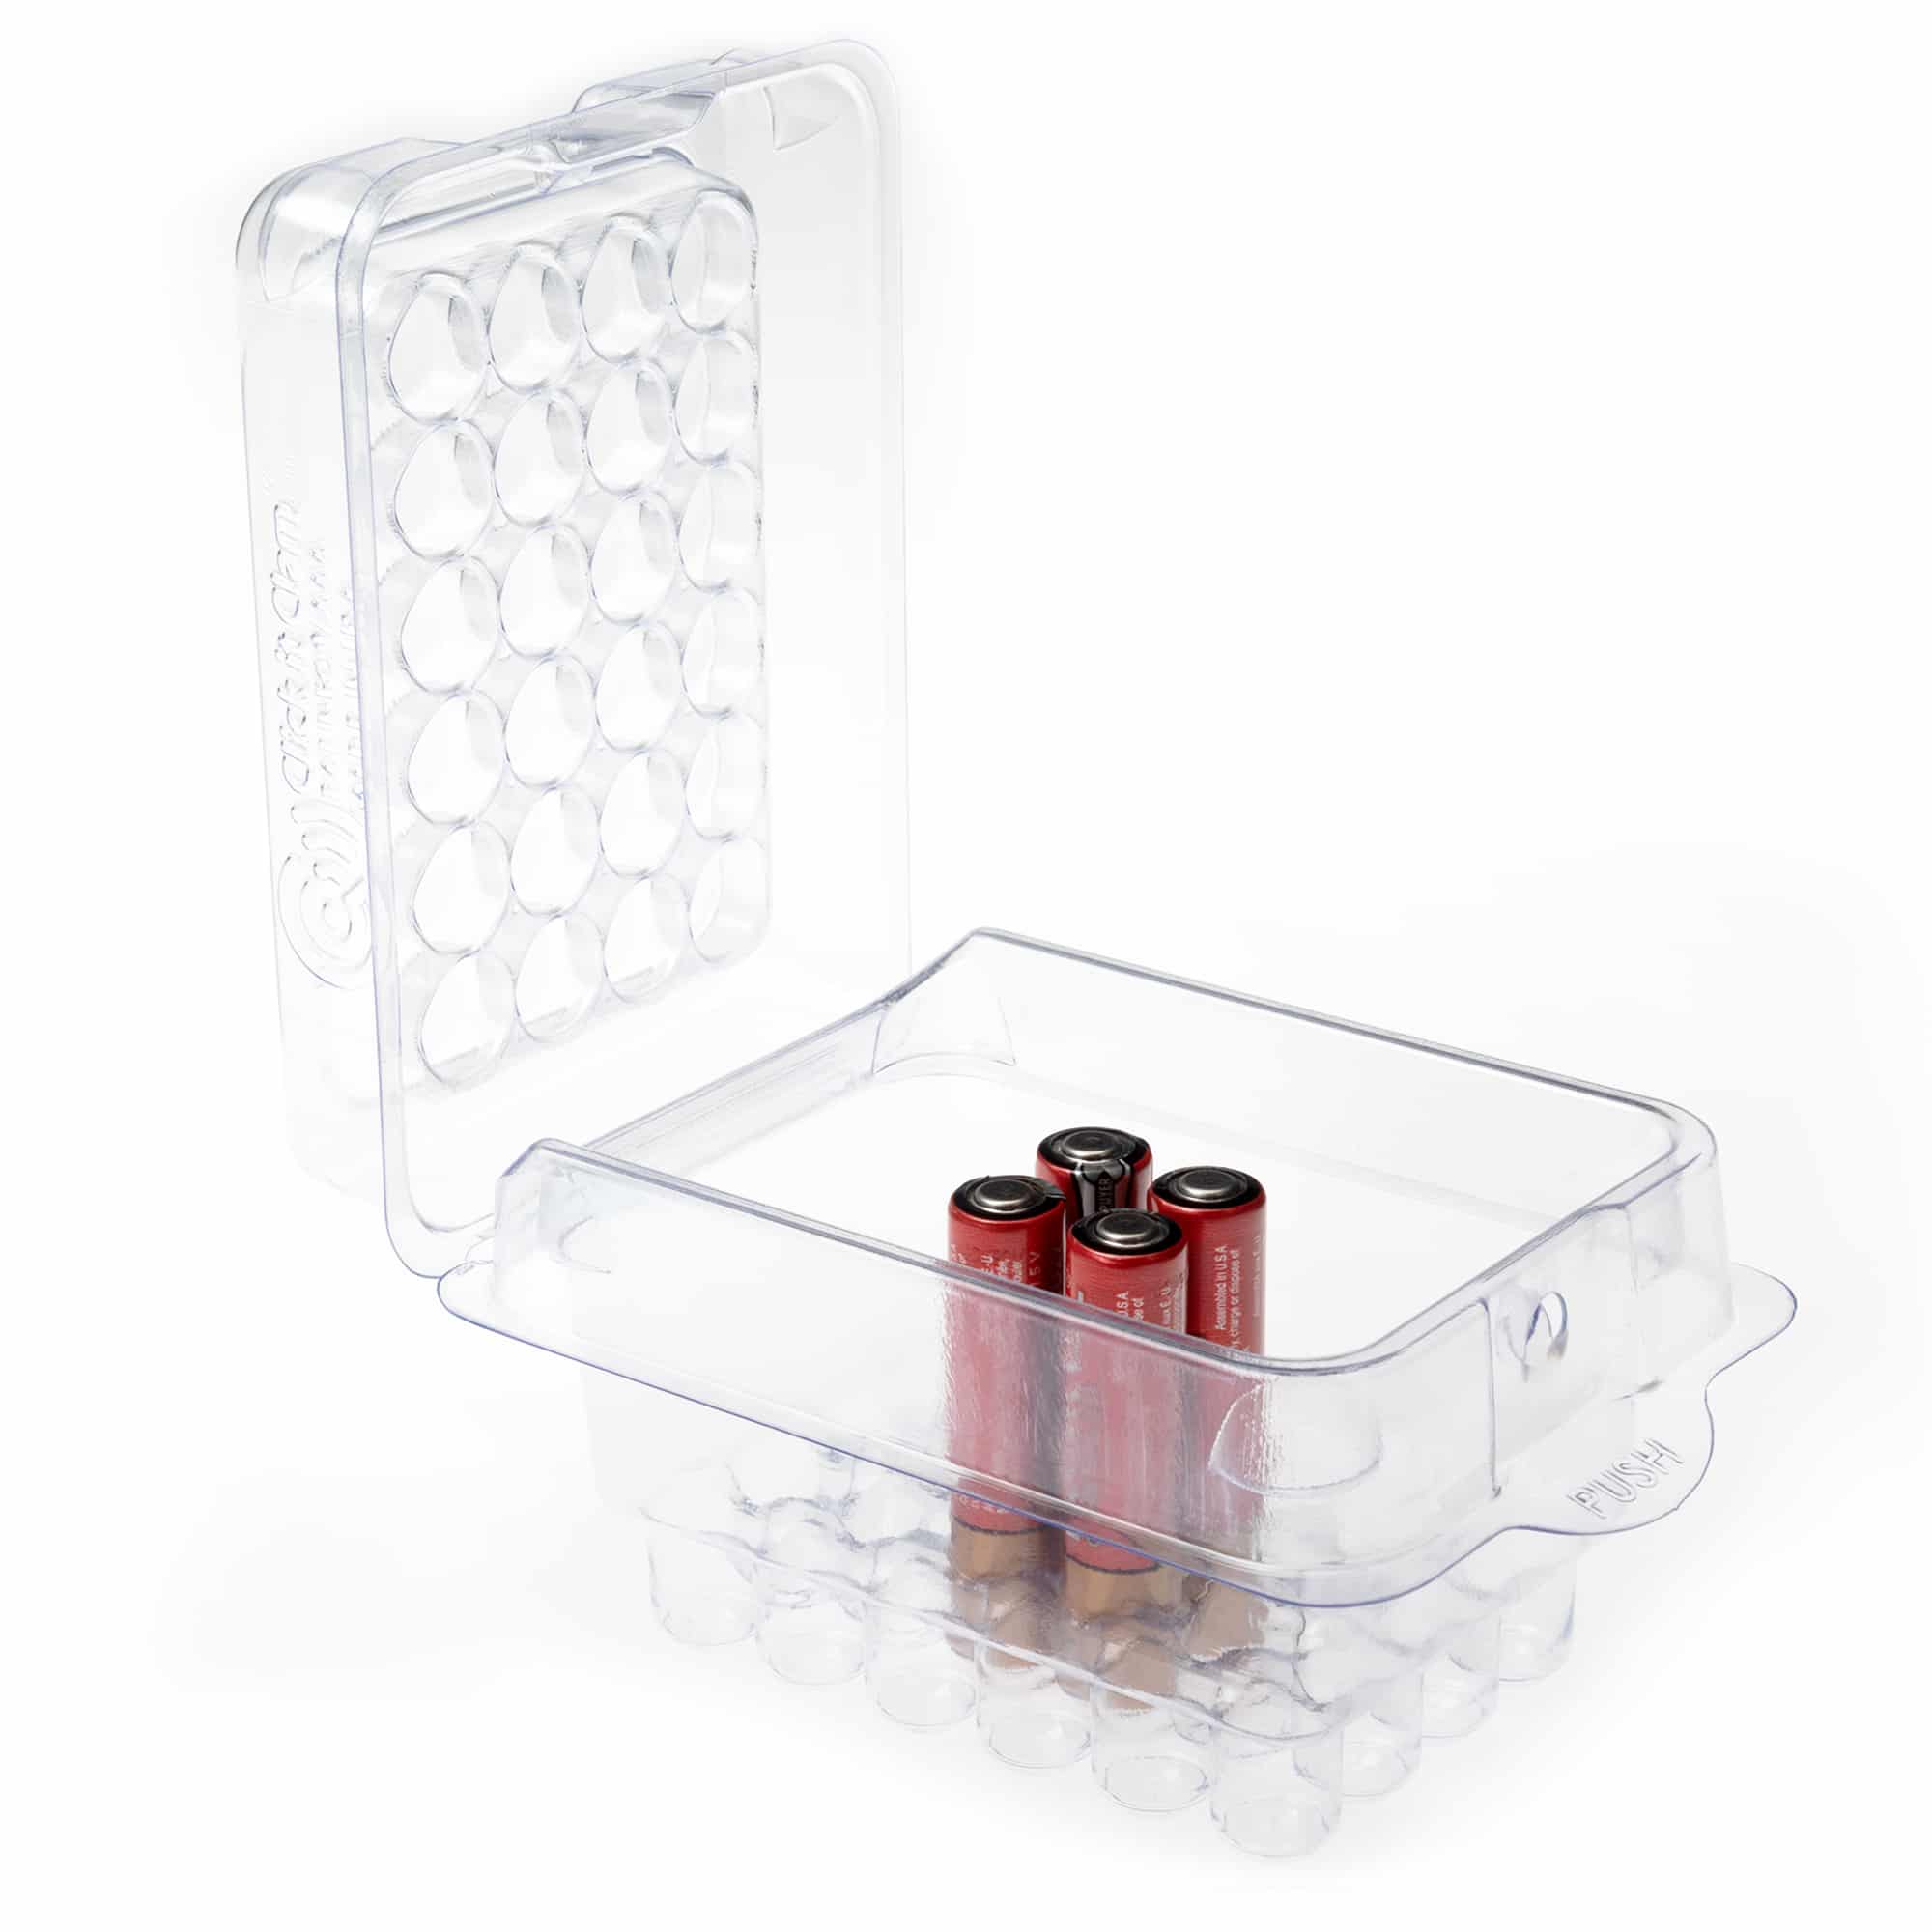 AAA Battery Case (24CT)